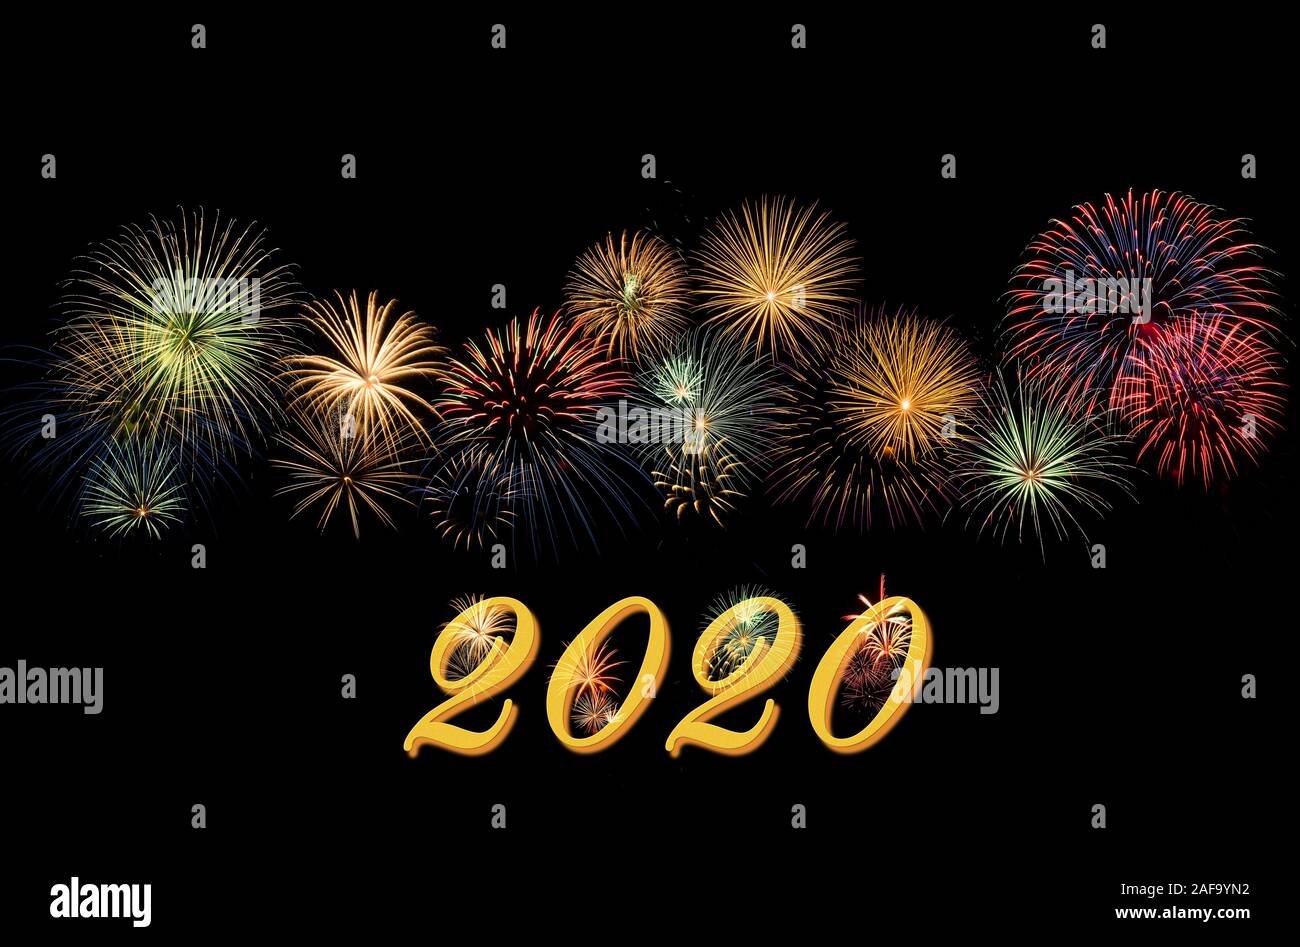 Festive fireworks display for a Happy New Year 2020 wishes Stock Photo